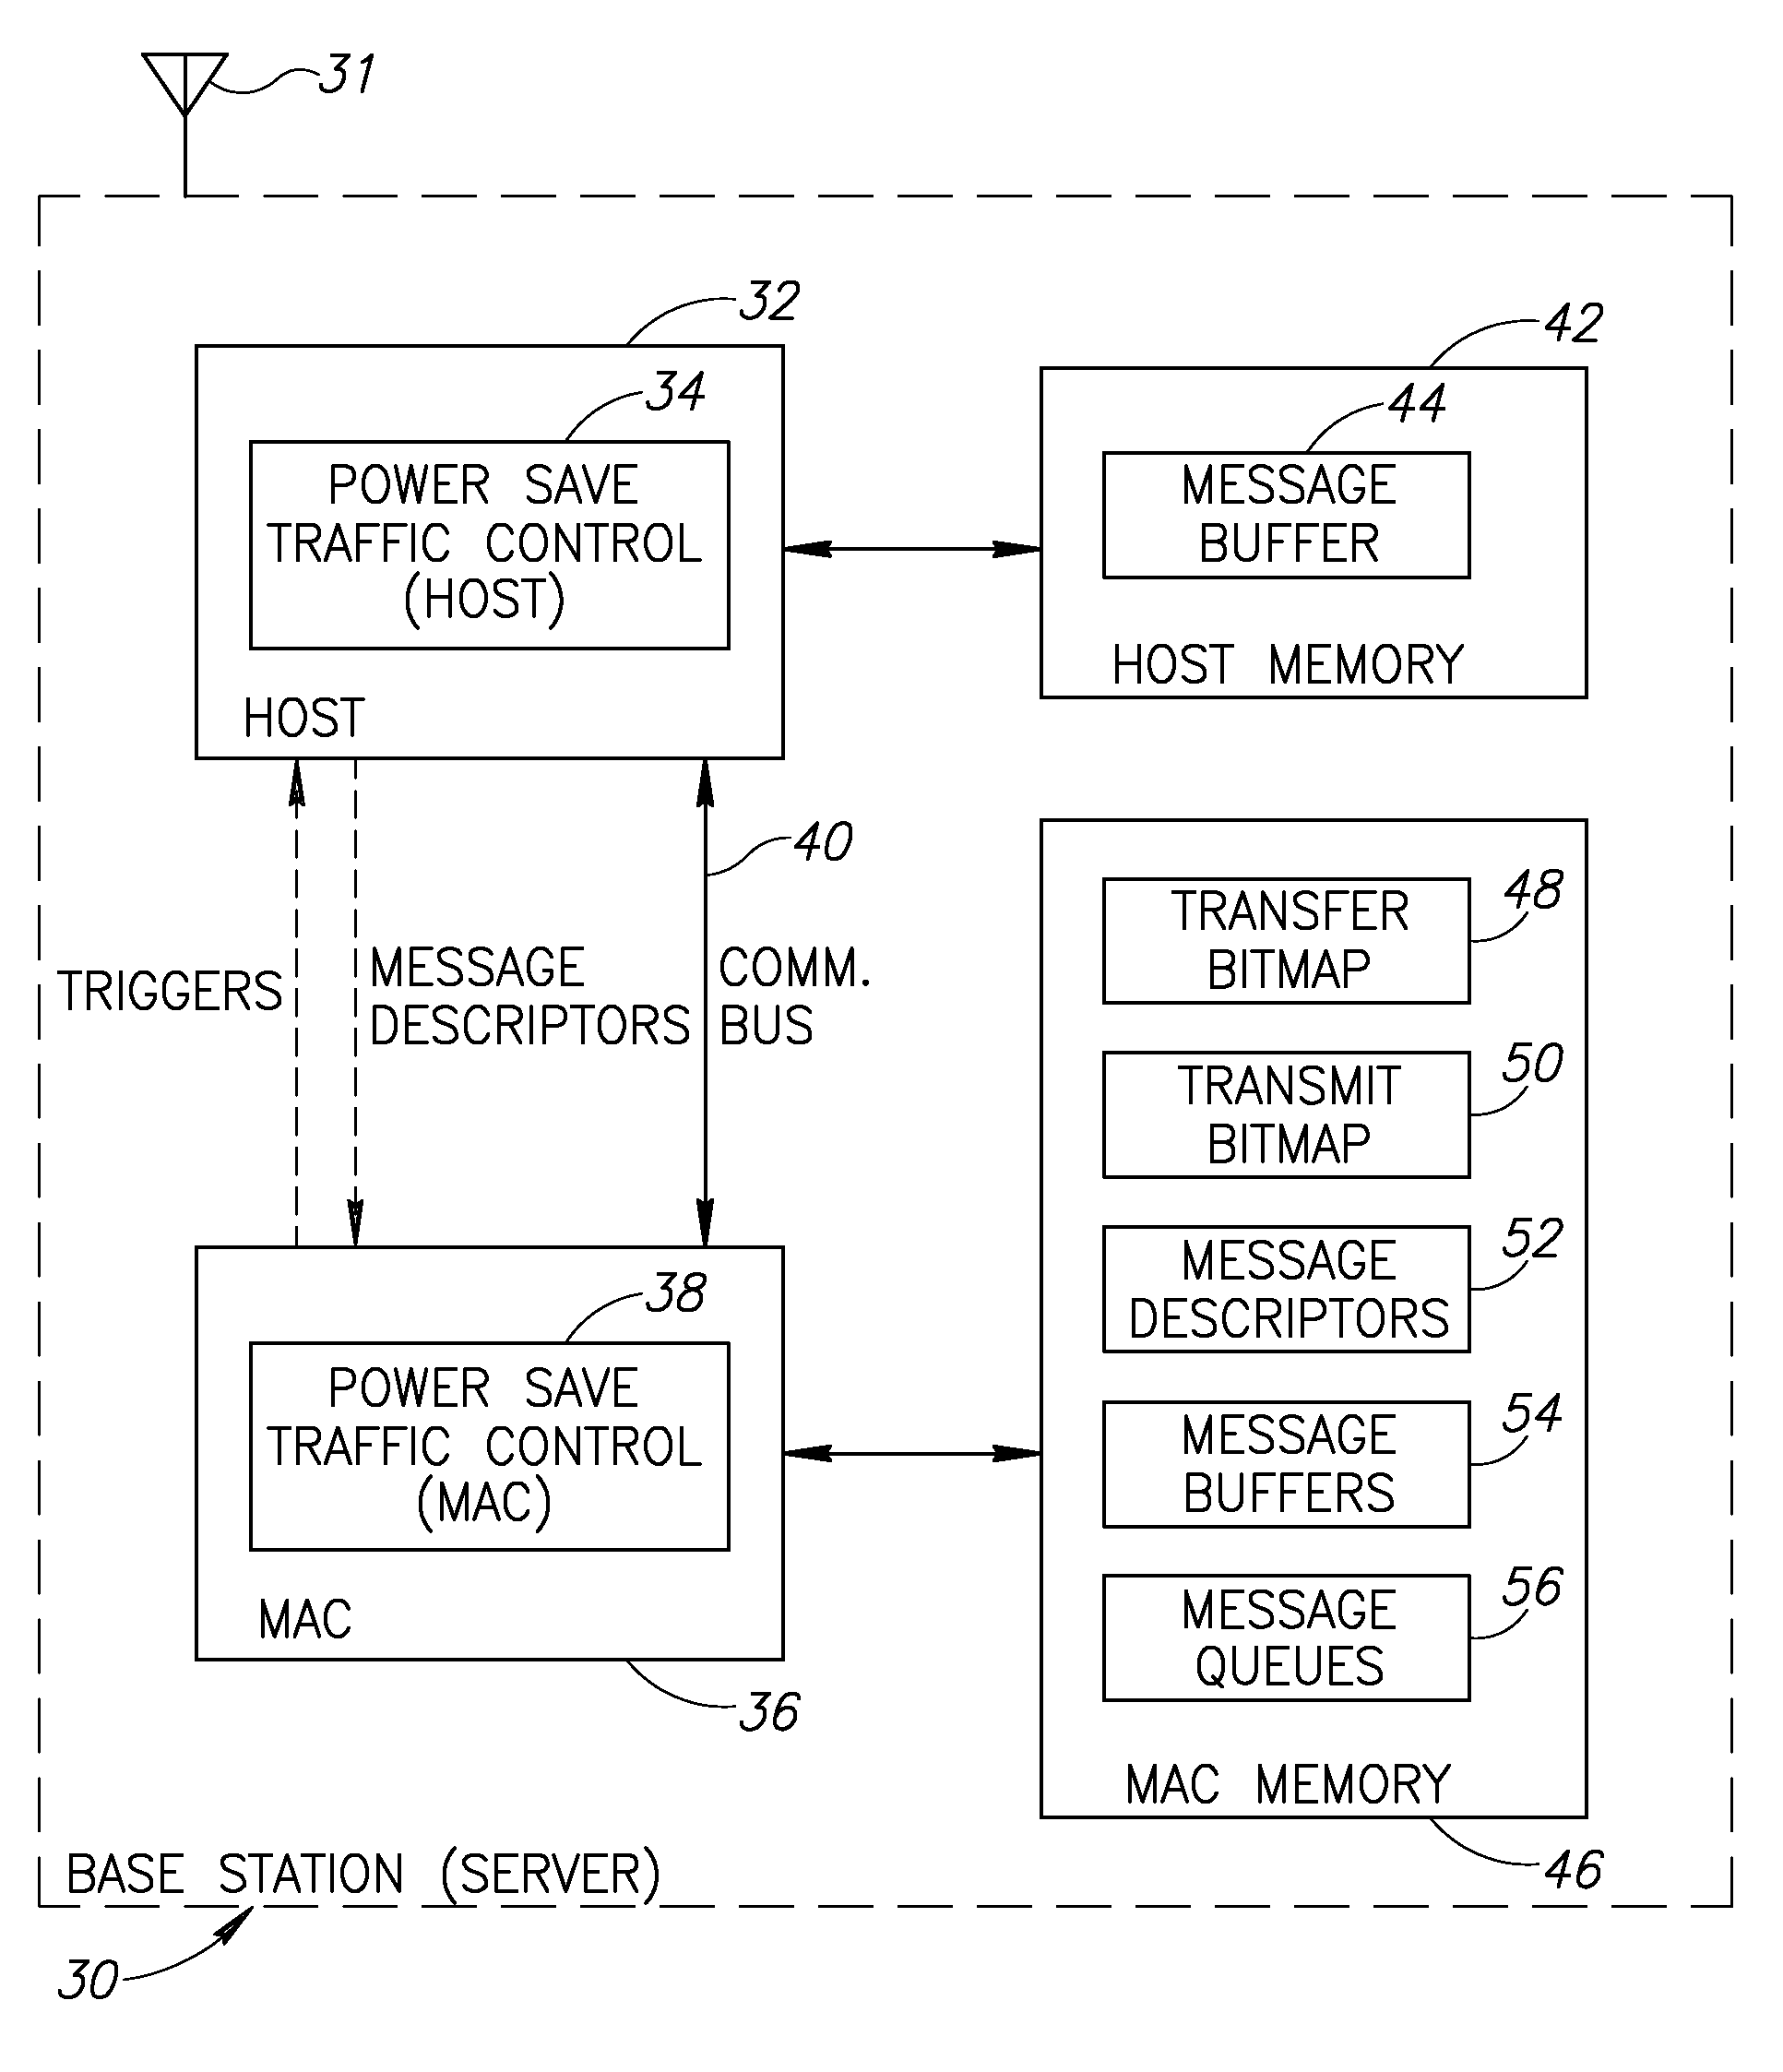 Apparatus for and method of power save traffic control in client/server networks